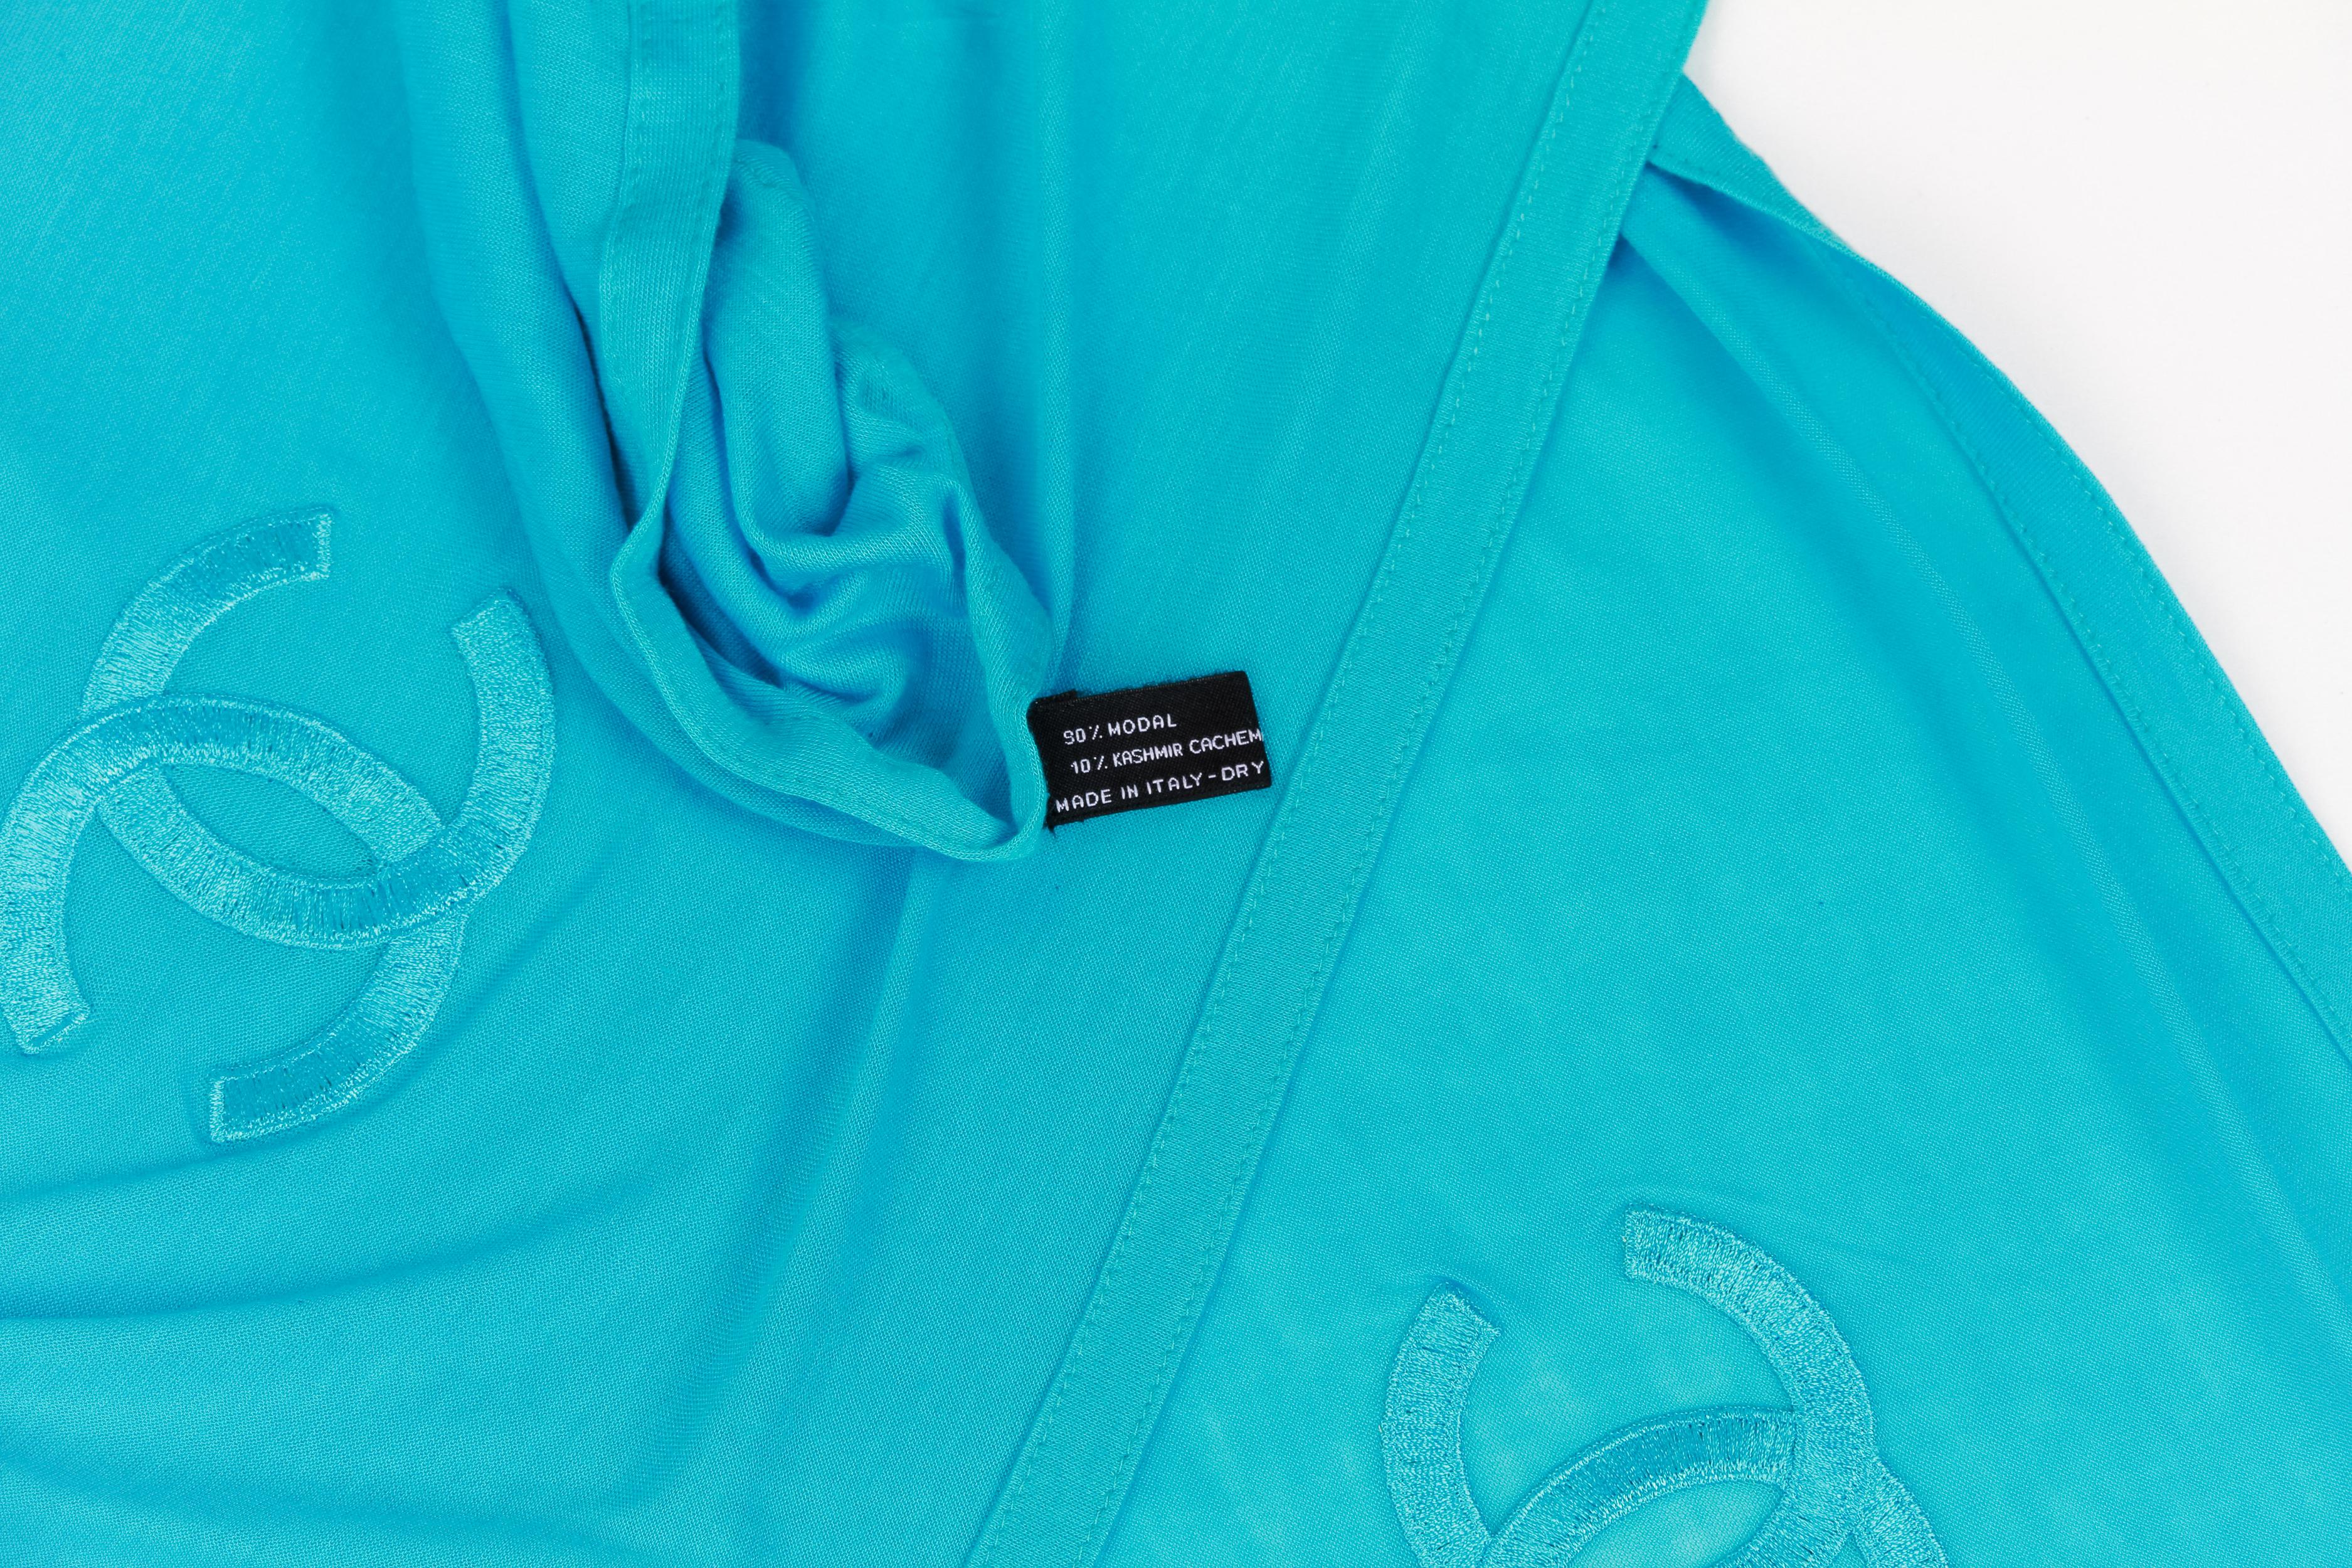 Chanel Oversize Turquoise Jersey Shawl In New Condition For Sale In West Hollywood, CA